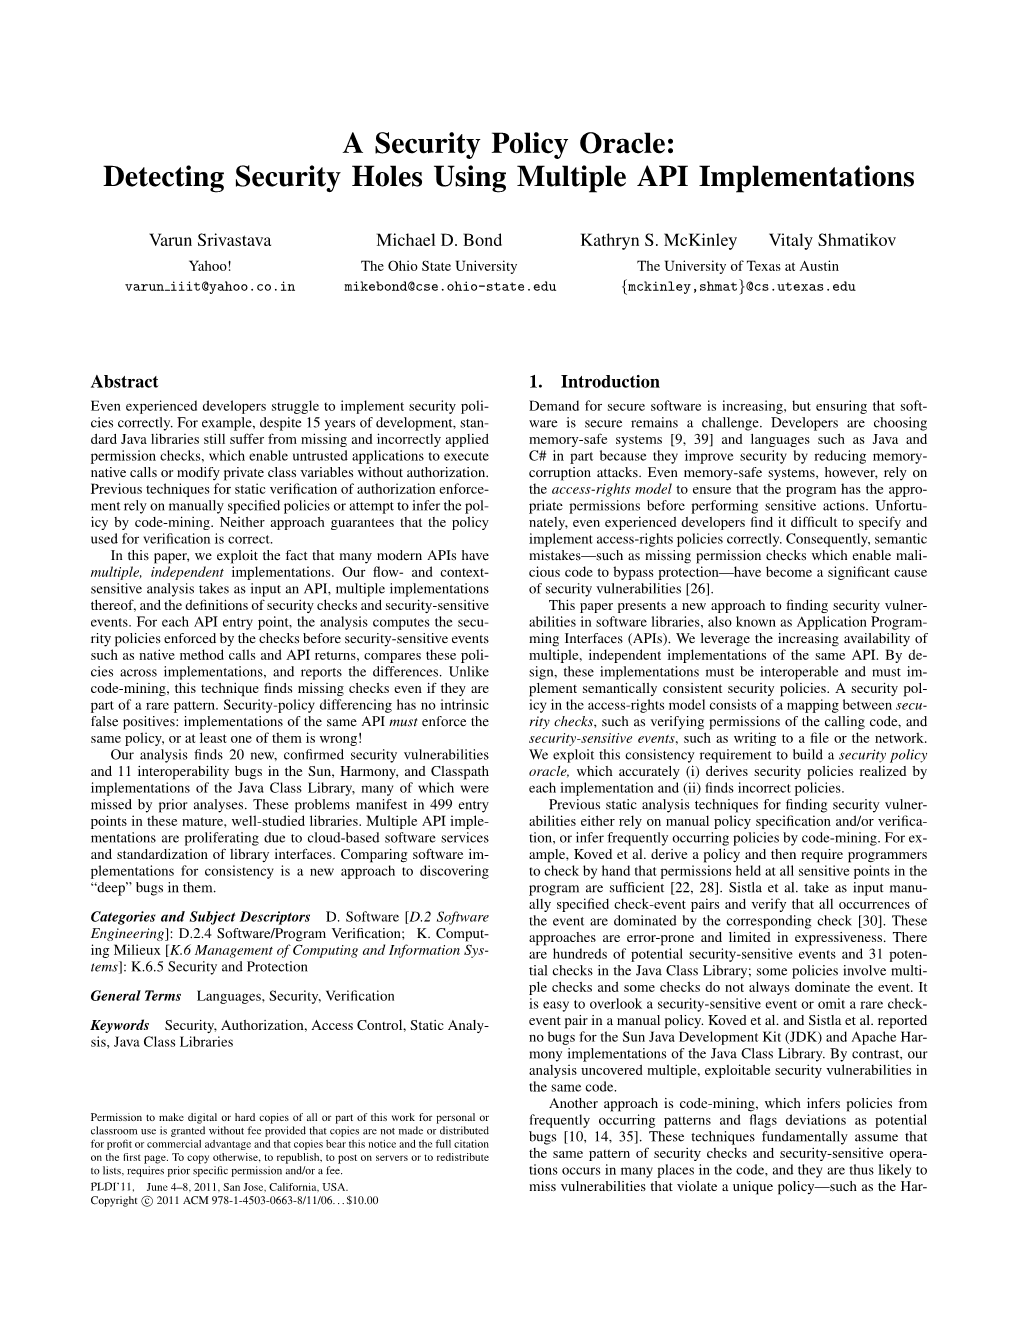 A Security Policy Oracle: Detecting Security Holes Using Multiple API Implementations